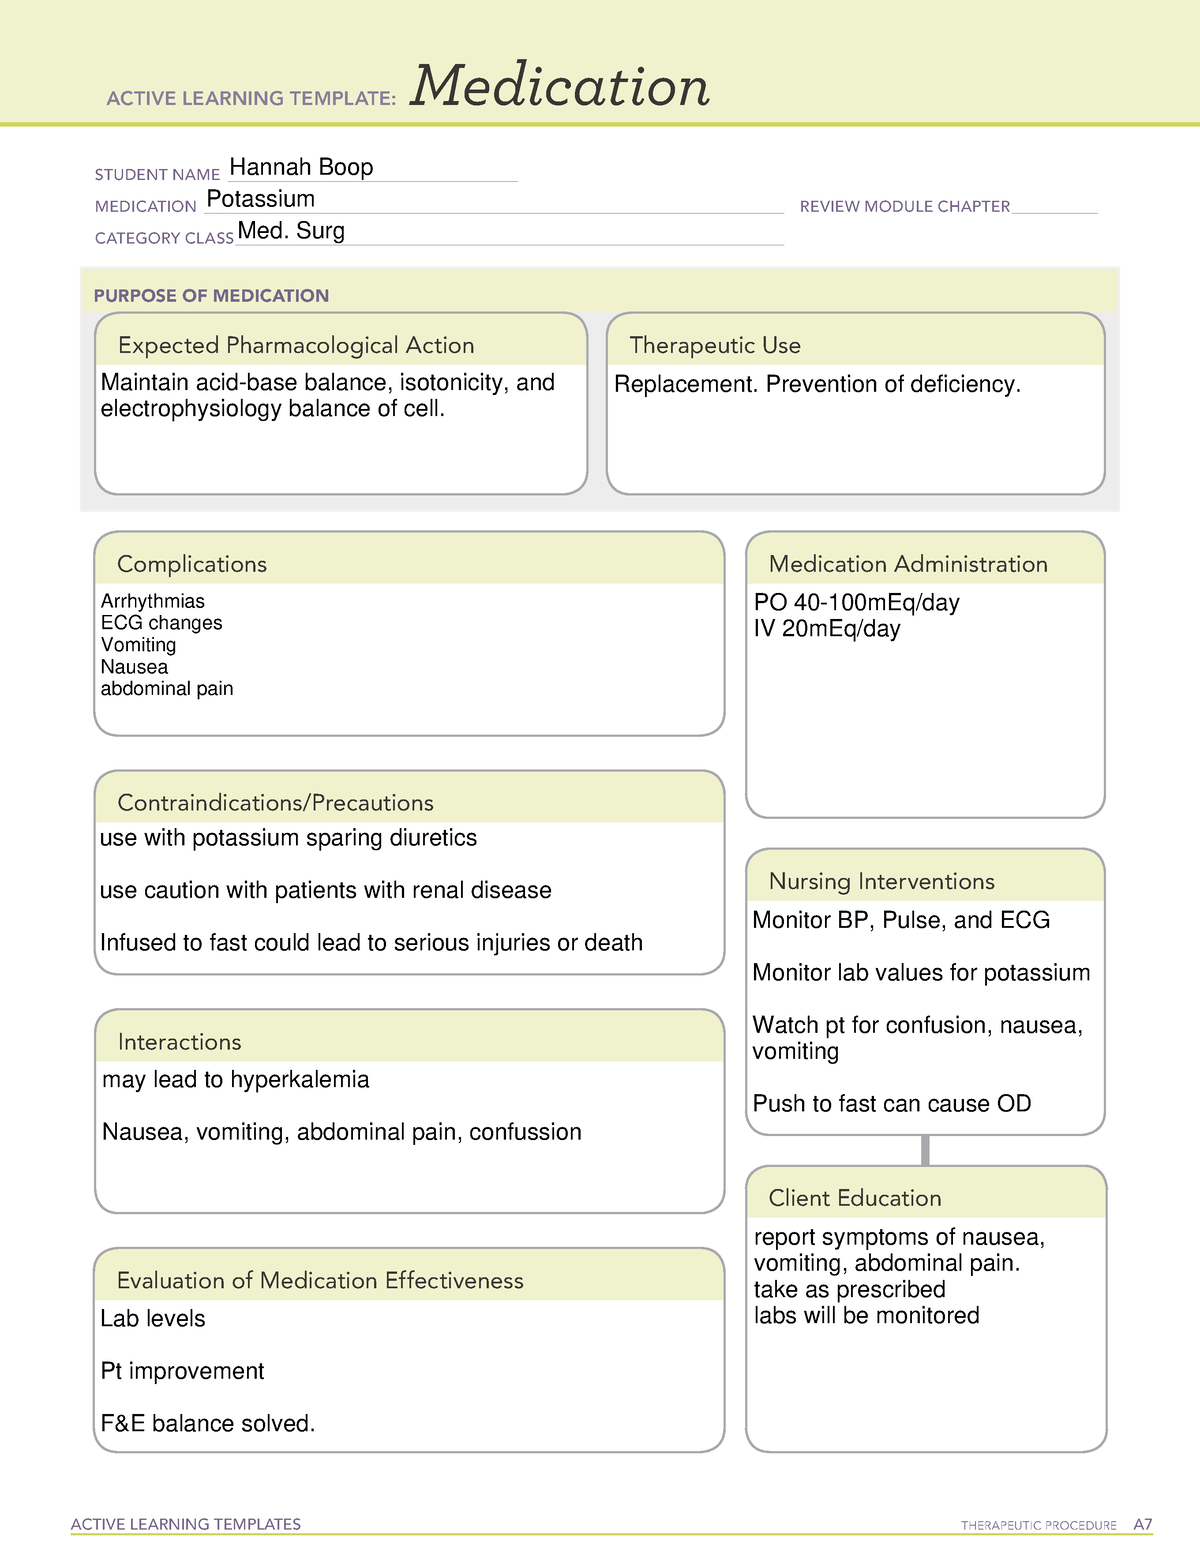 ATI medication template ACTIVE LEARNING TEMPLATES THERAPEUTIC